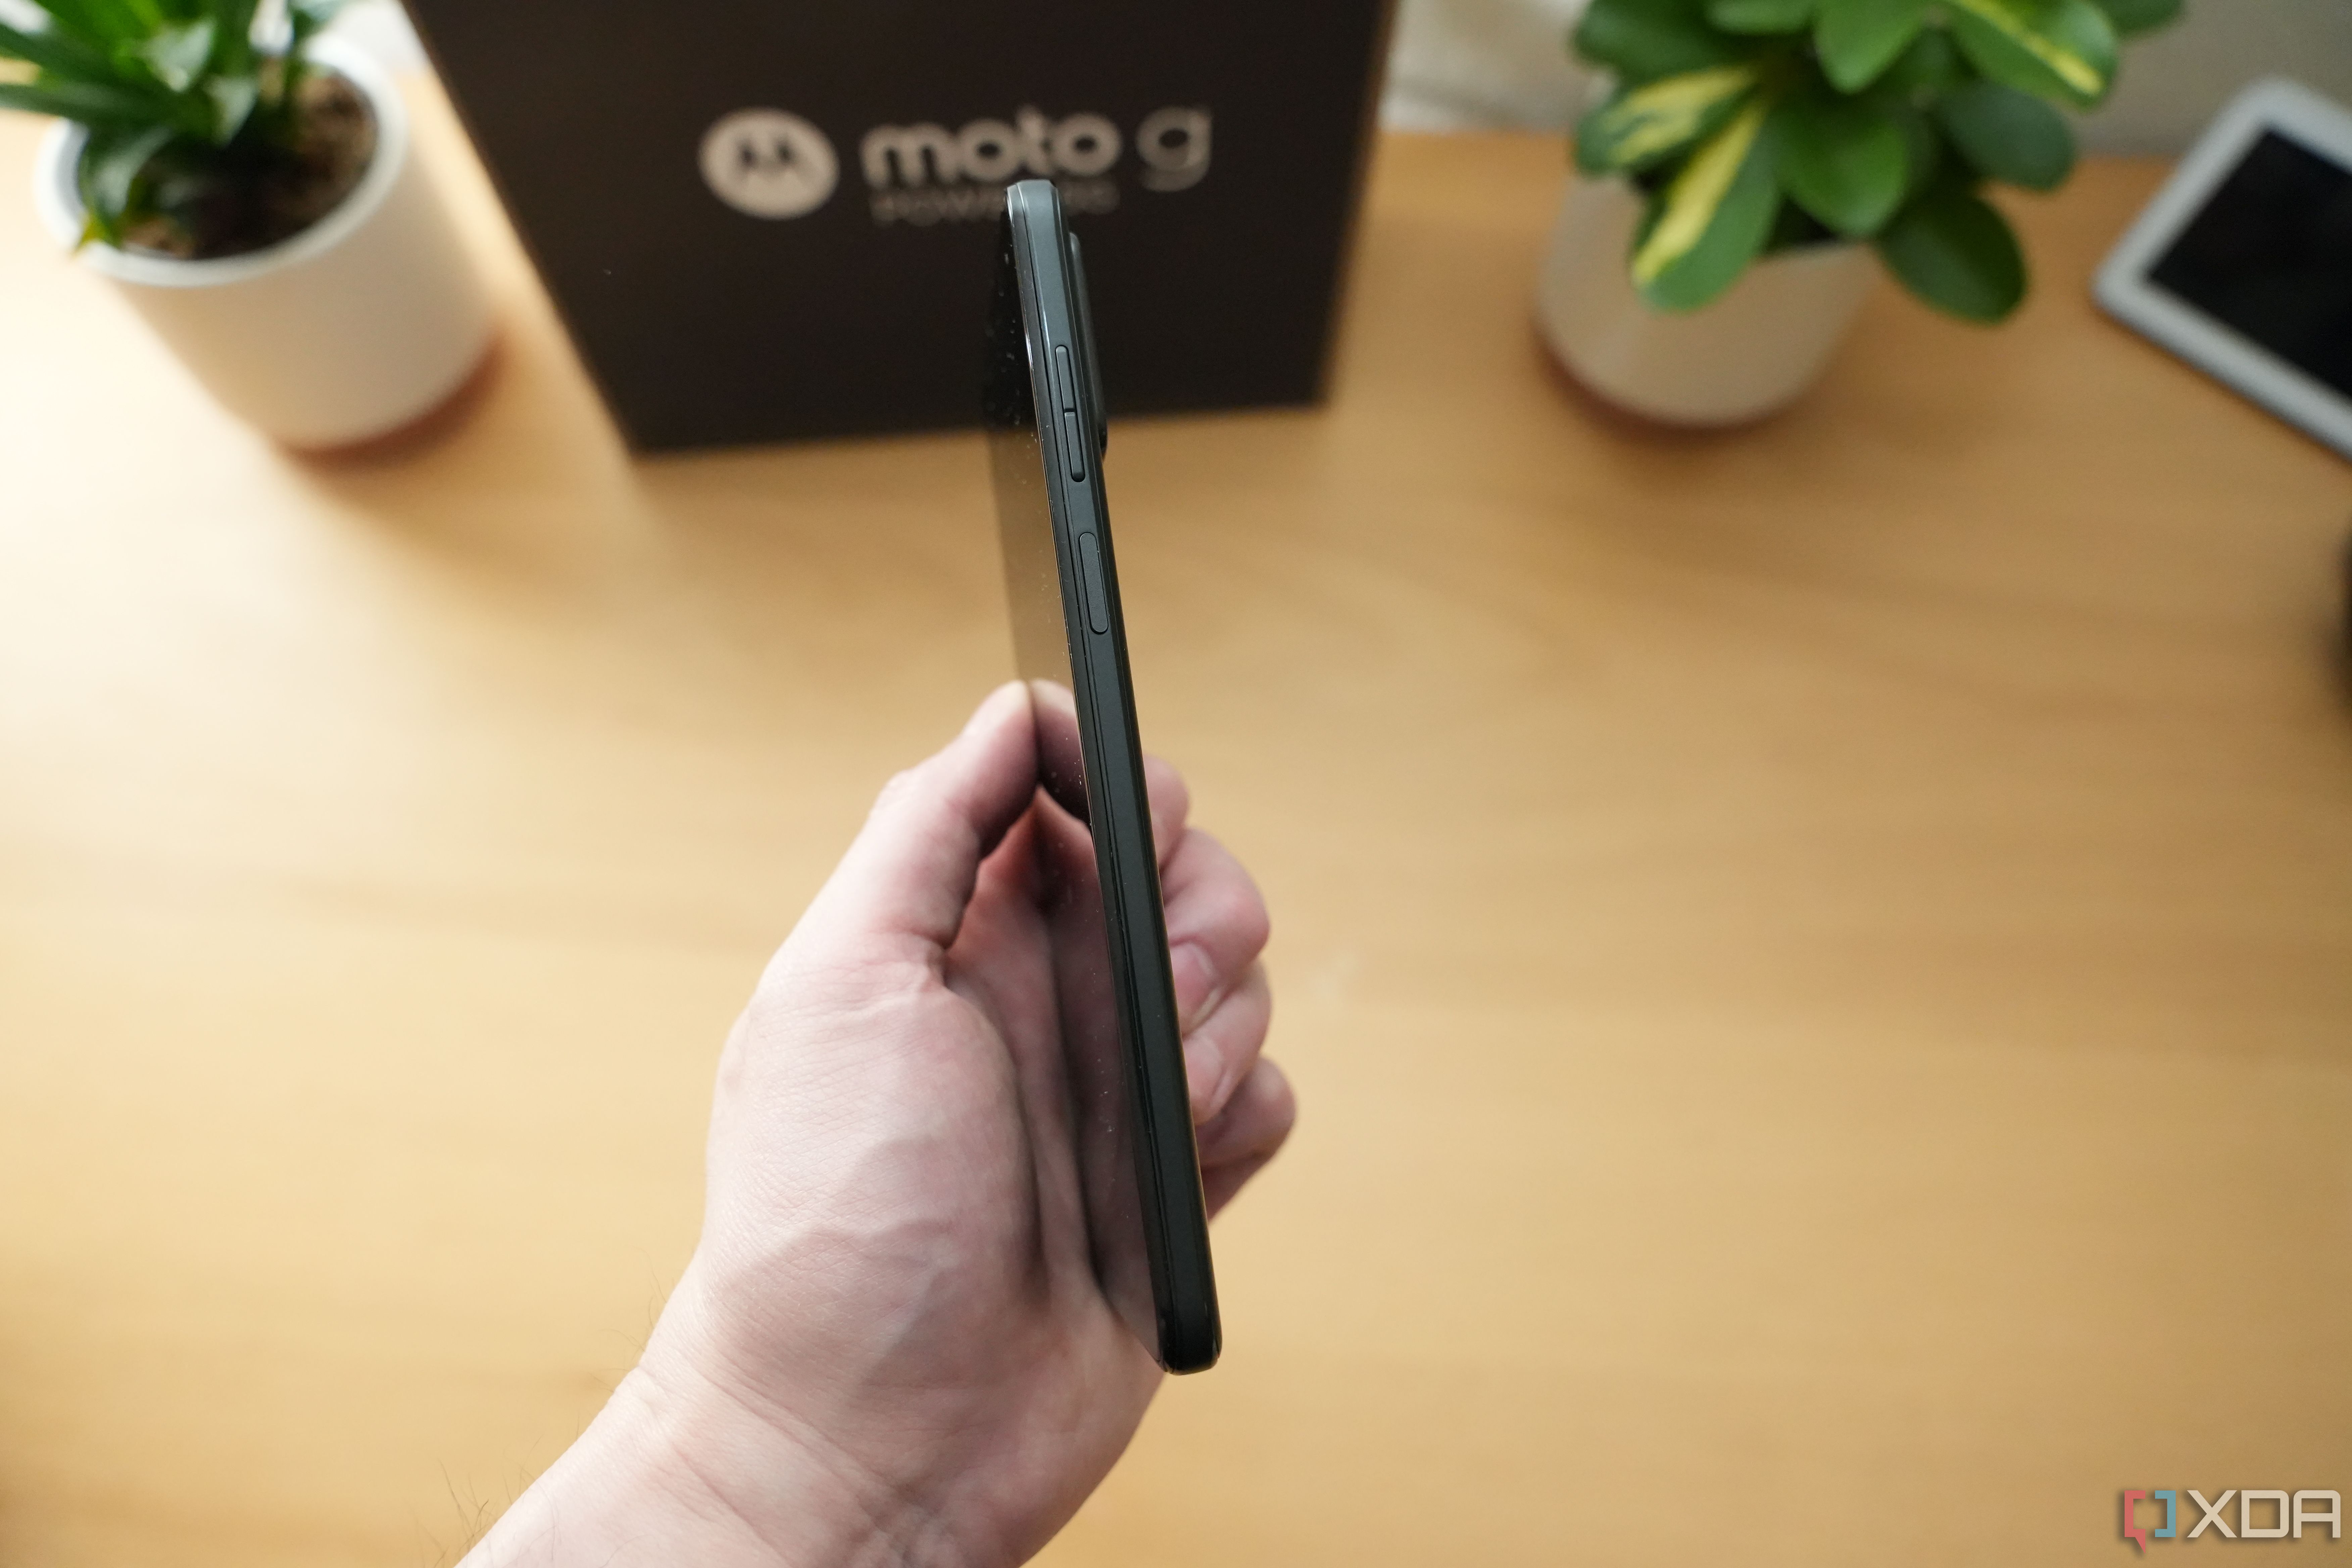 Motorola G Power 5G 2023 side view showing volume rocker and power button in front of wood tablet with plants and Motorola packing in the background